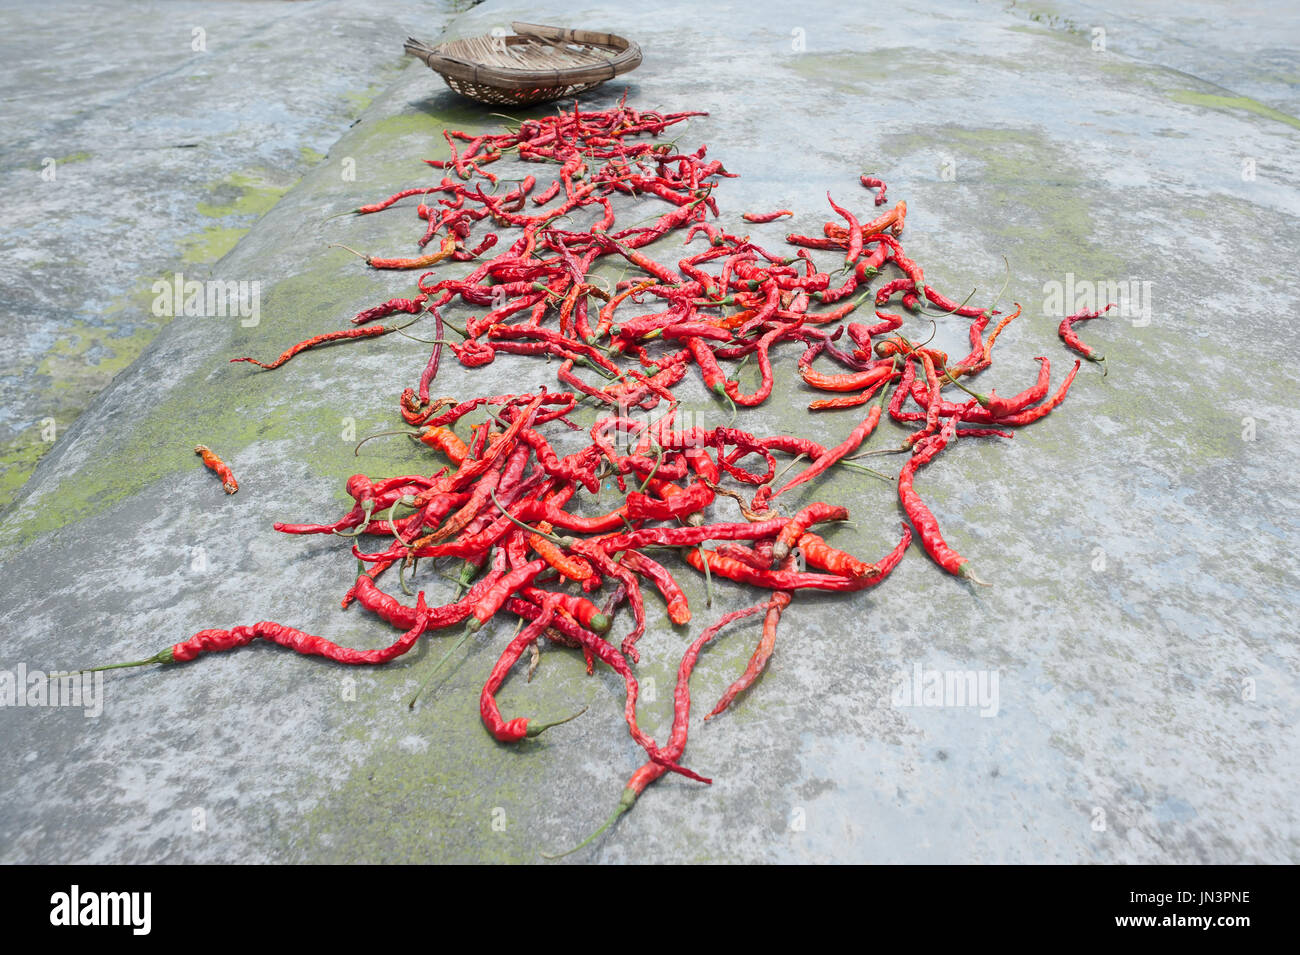 Red chili pepper drying on the ground with a basket in the background Stock Photo